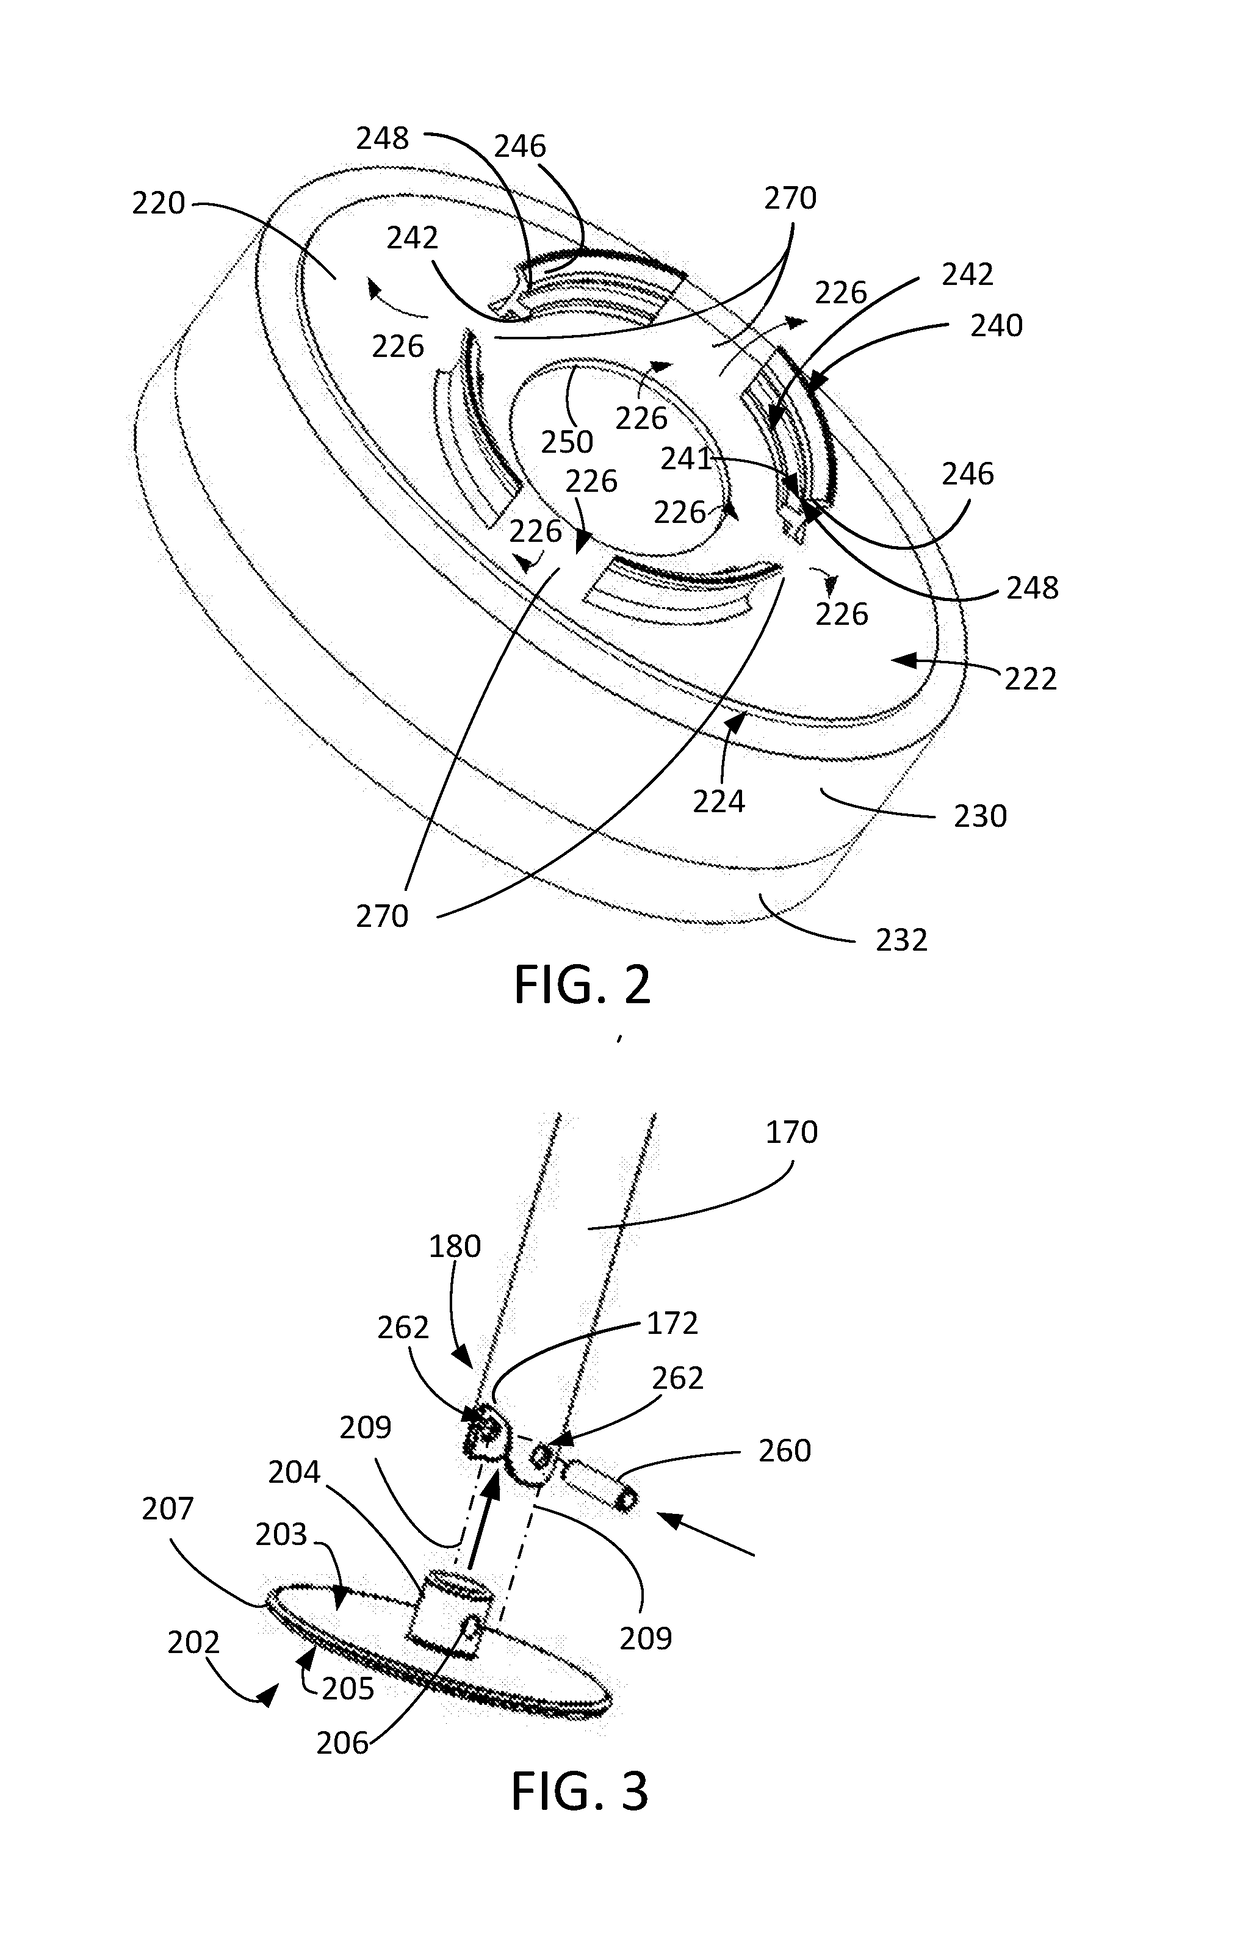 Patient positioning apparatus, system and method with socket connector for positioning patient in lateral position